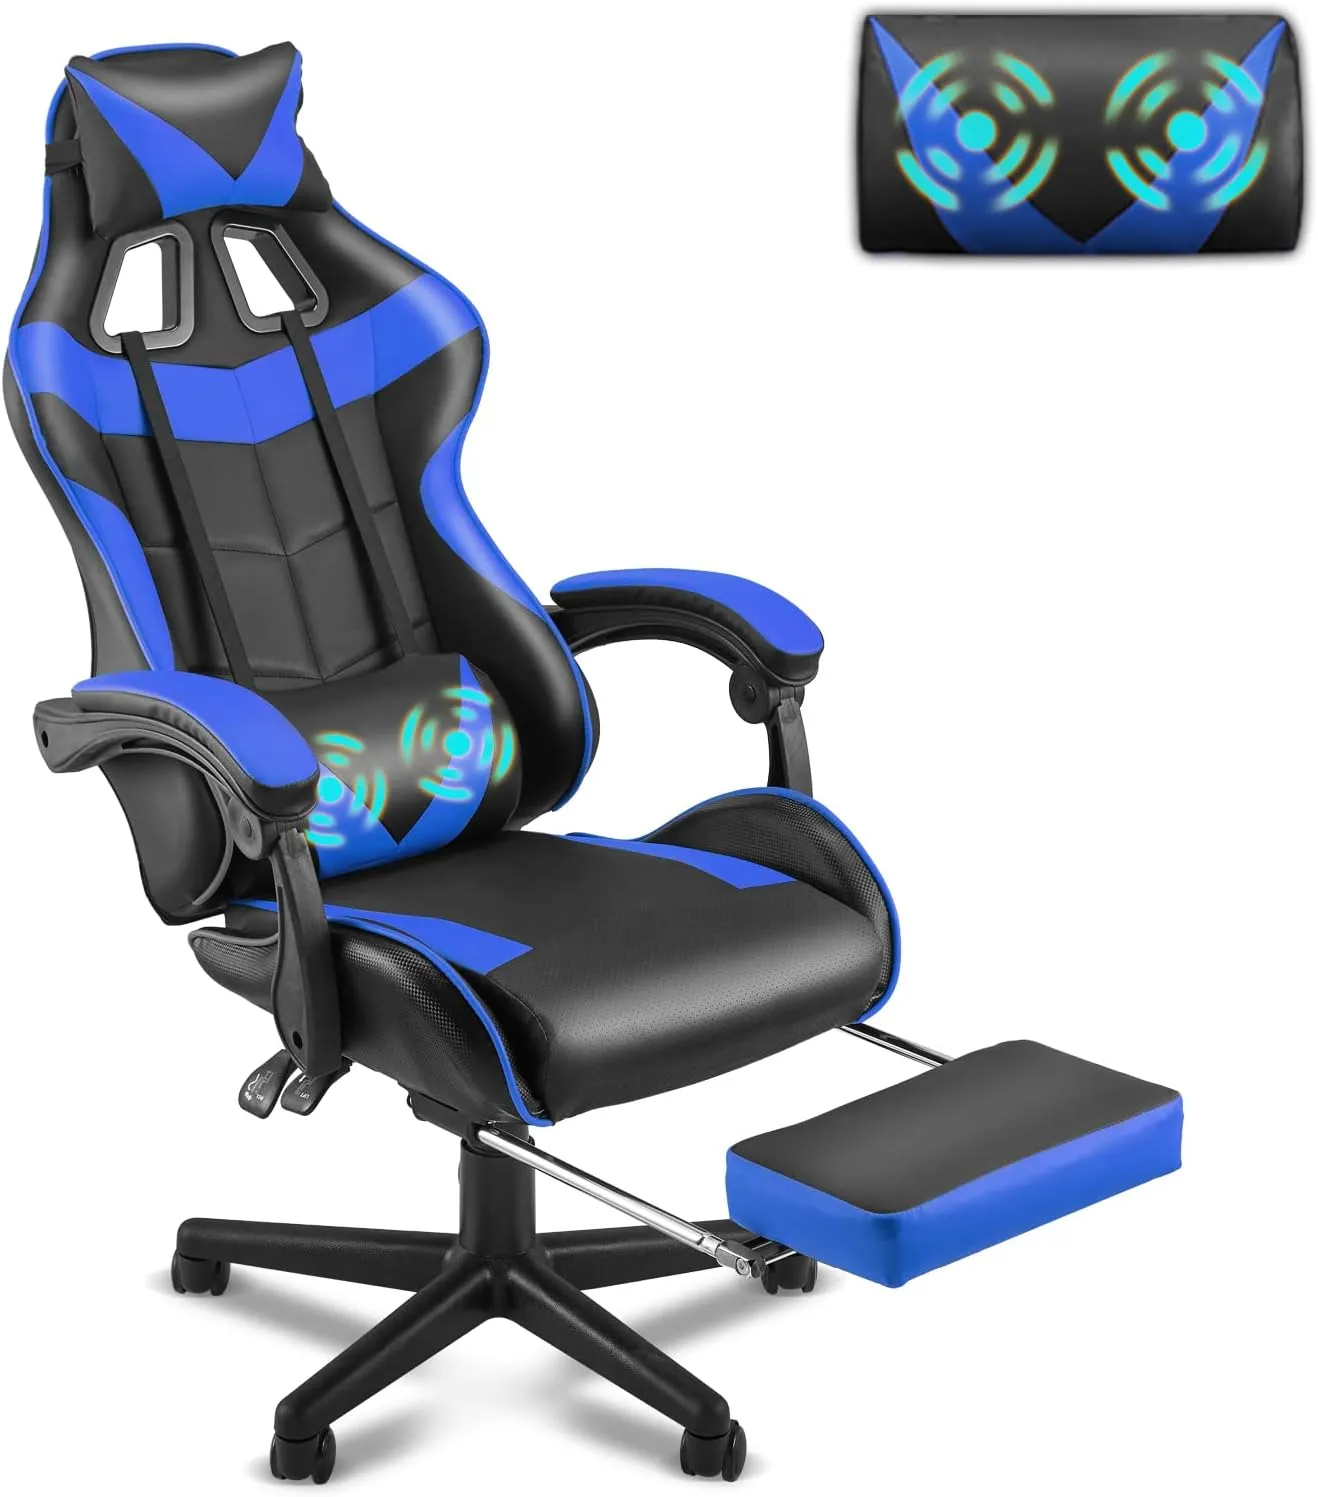 Autofull Ergonomic Gaming Chair with Lumbar Support and Footrest 